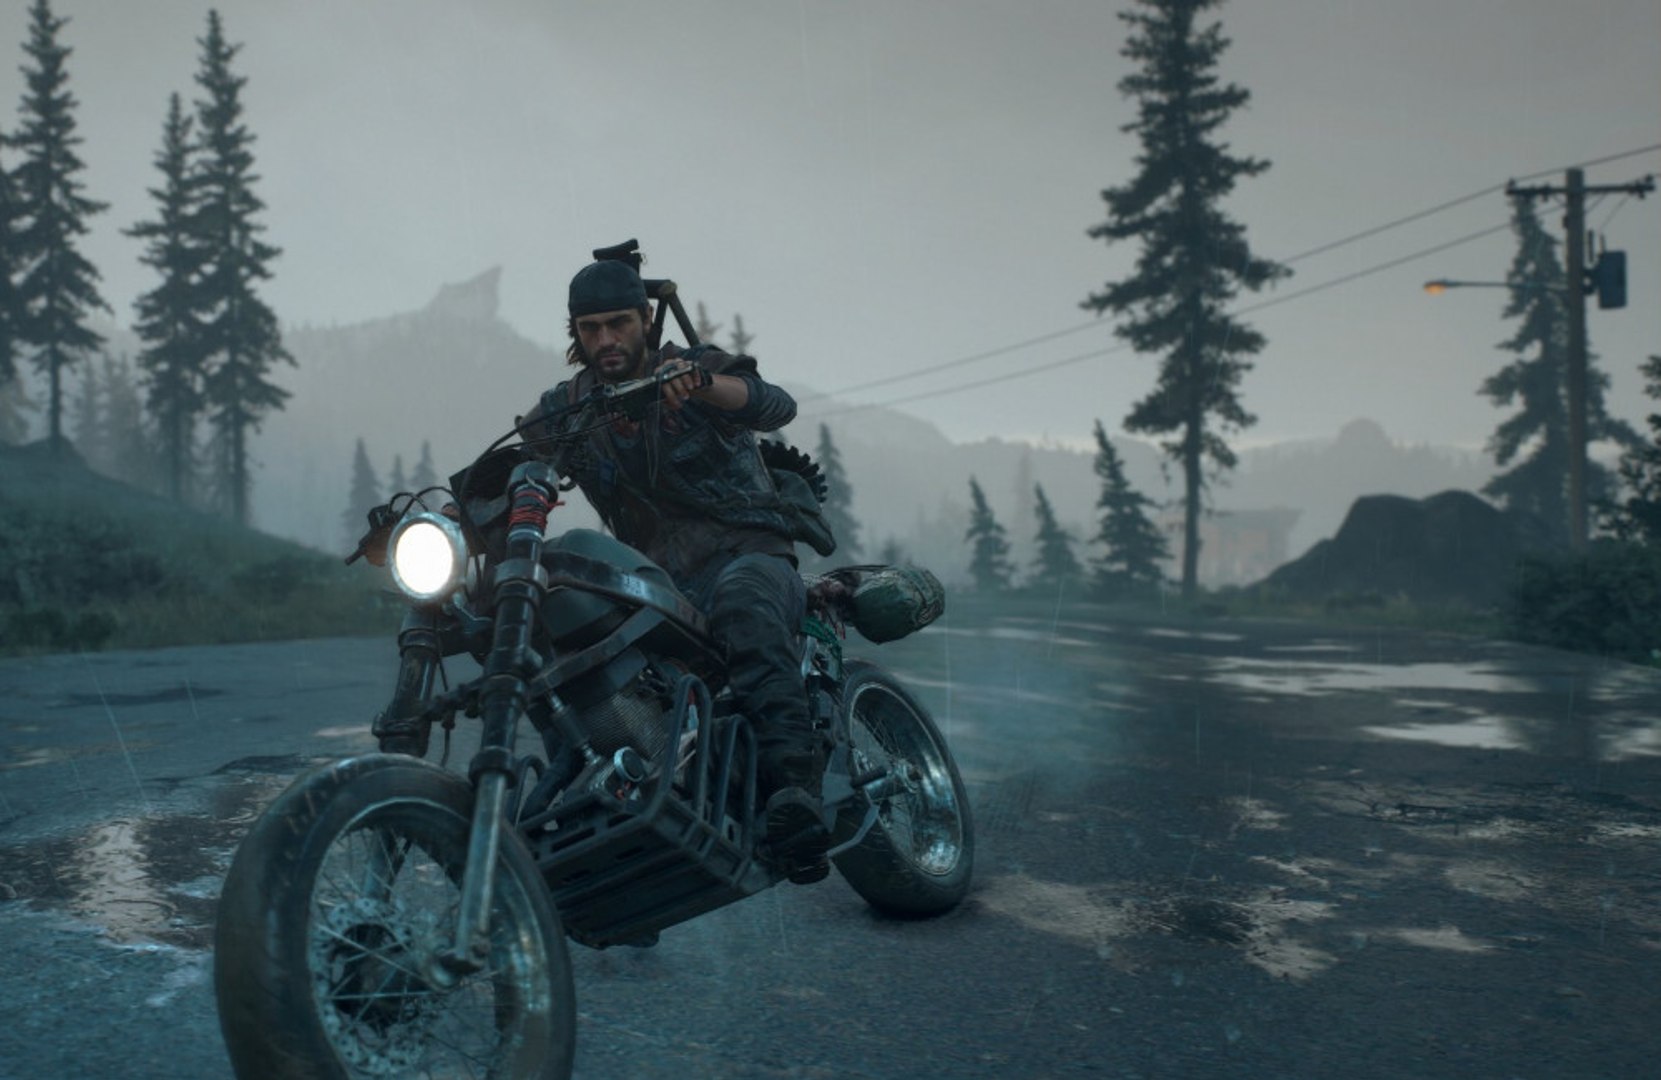 Days Gone Lead Designer Thanks Fans for Playing the Game No Matter